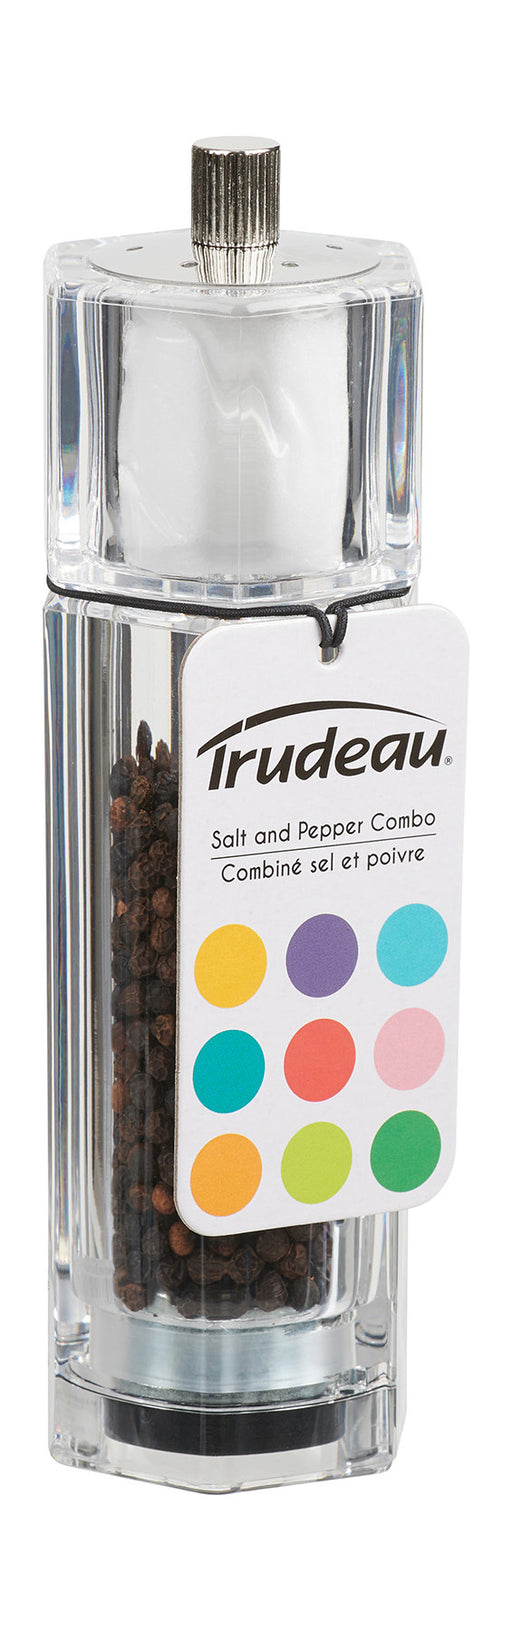 Trudeau Octo 6.5-Inch Combination Pepper Mill and Salt Shaker, Acrylic